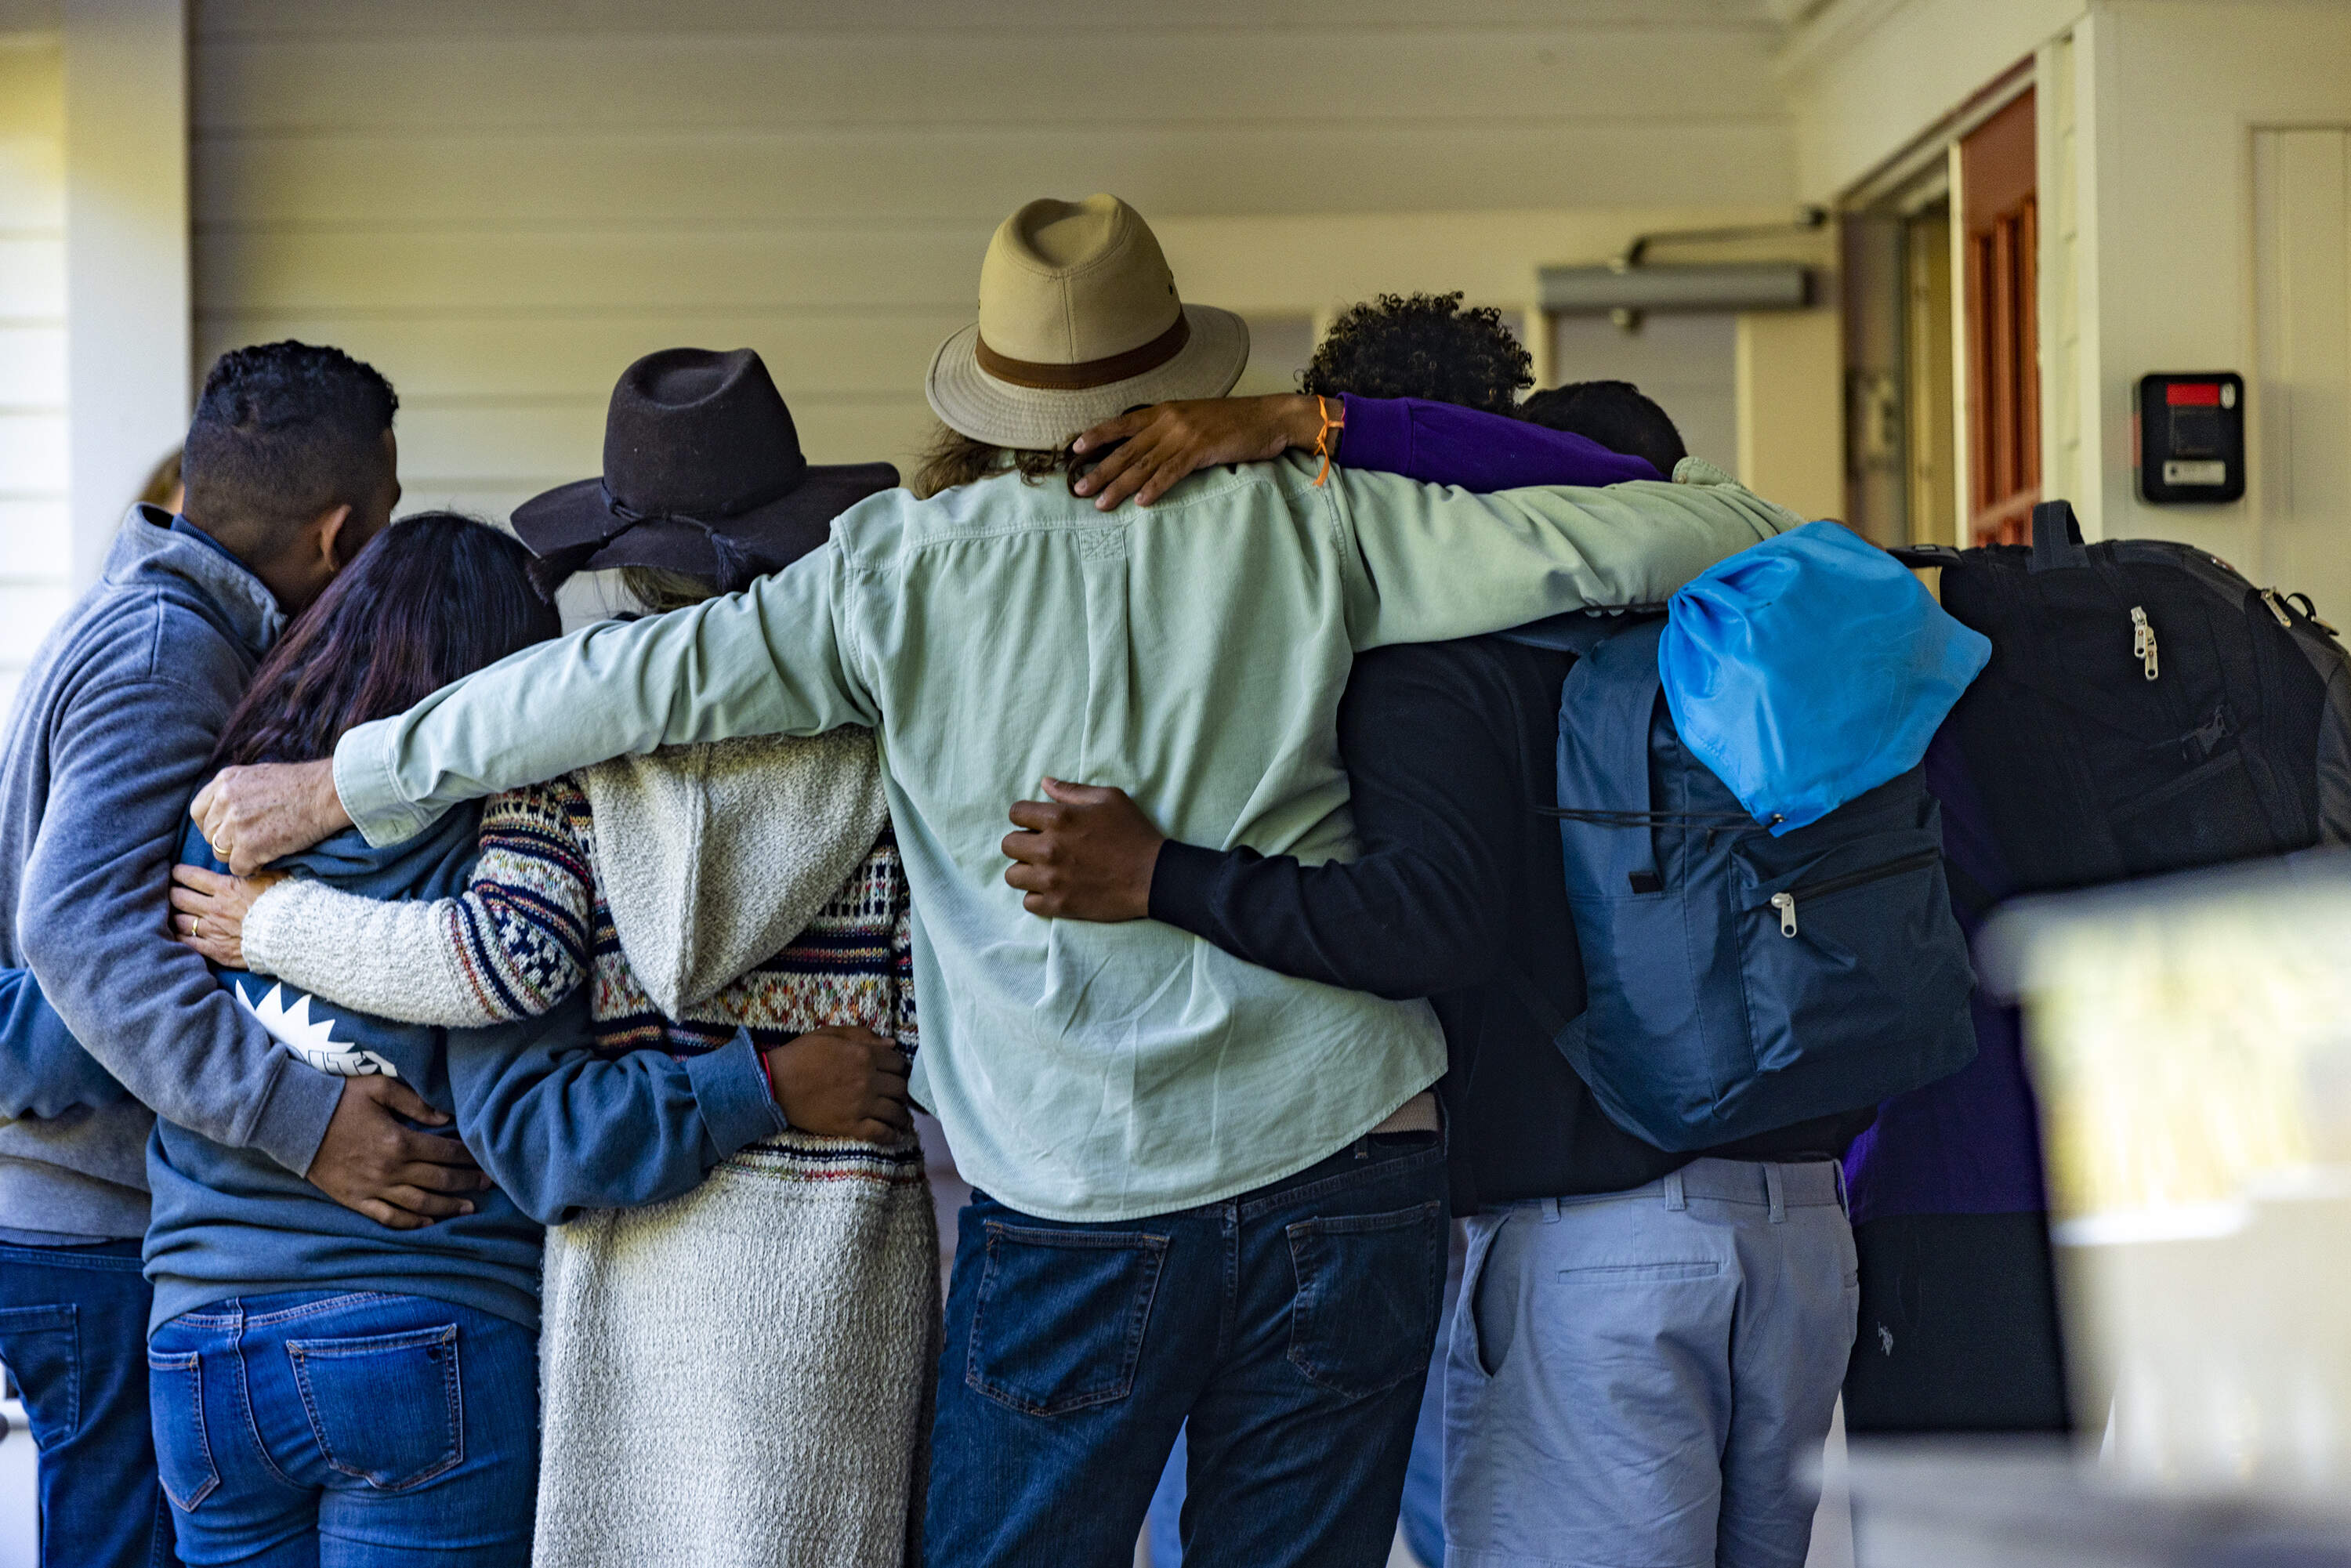 Immigrants and volunteers stand arm-in-arm in a huddle leaving St. Andrews Parish House in Edgartown. (Jesse Costa/WBUR)